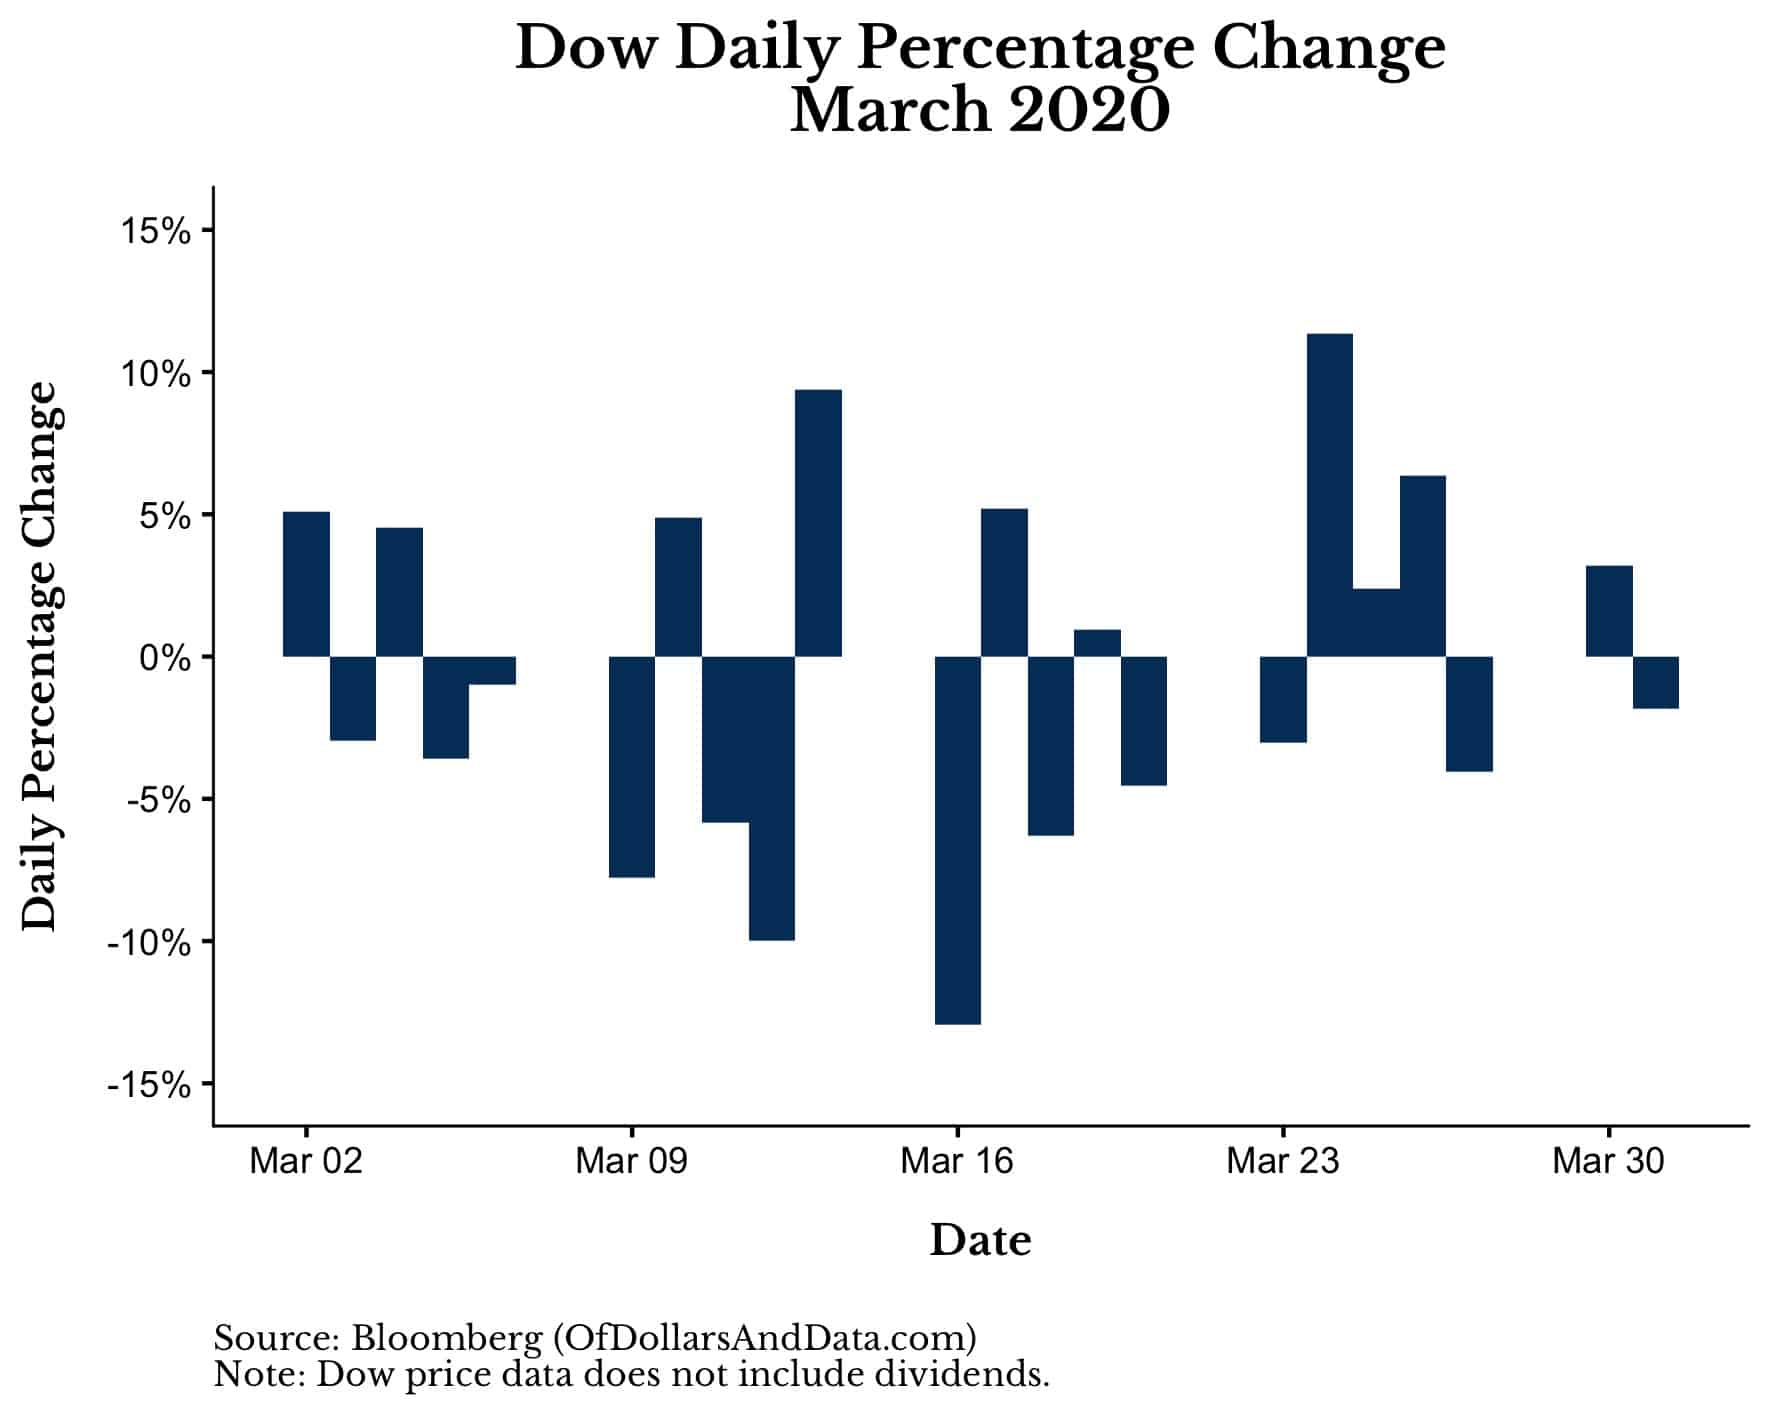 Dow Jones Industrial Average daily percentage change in March 2020